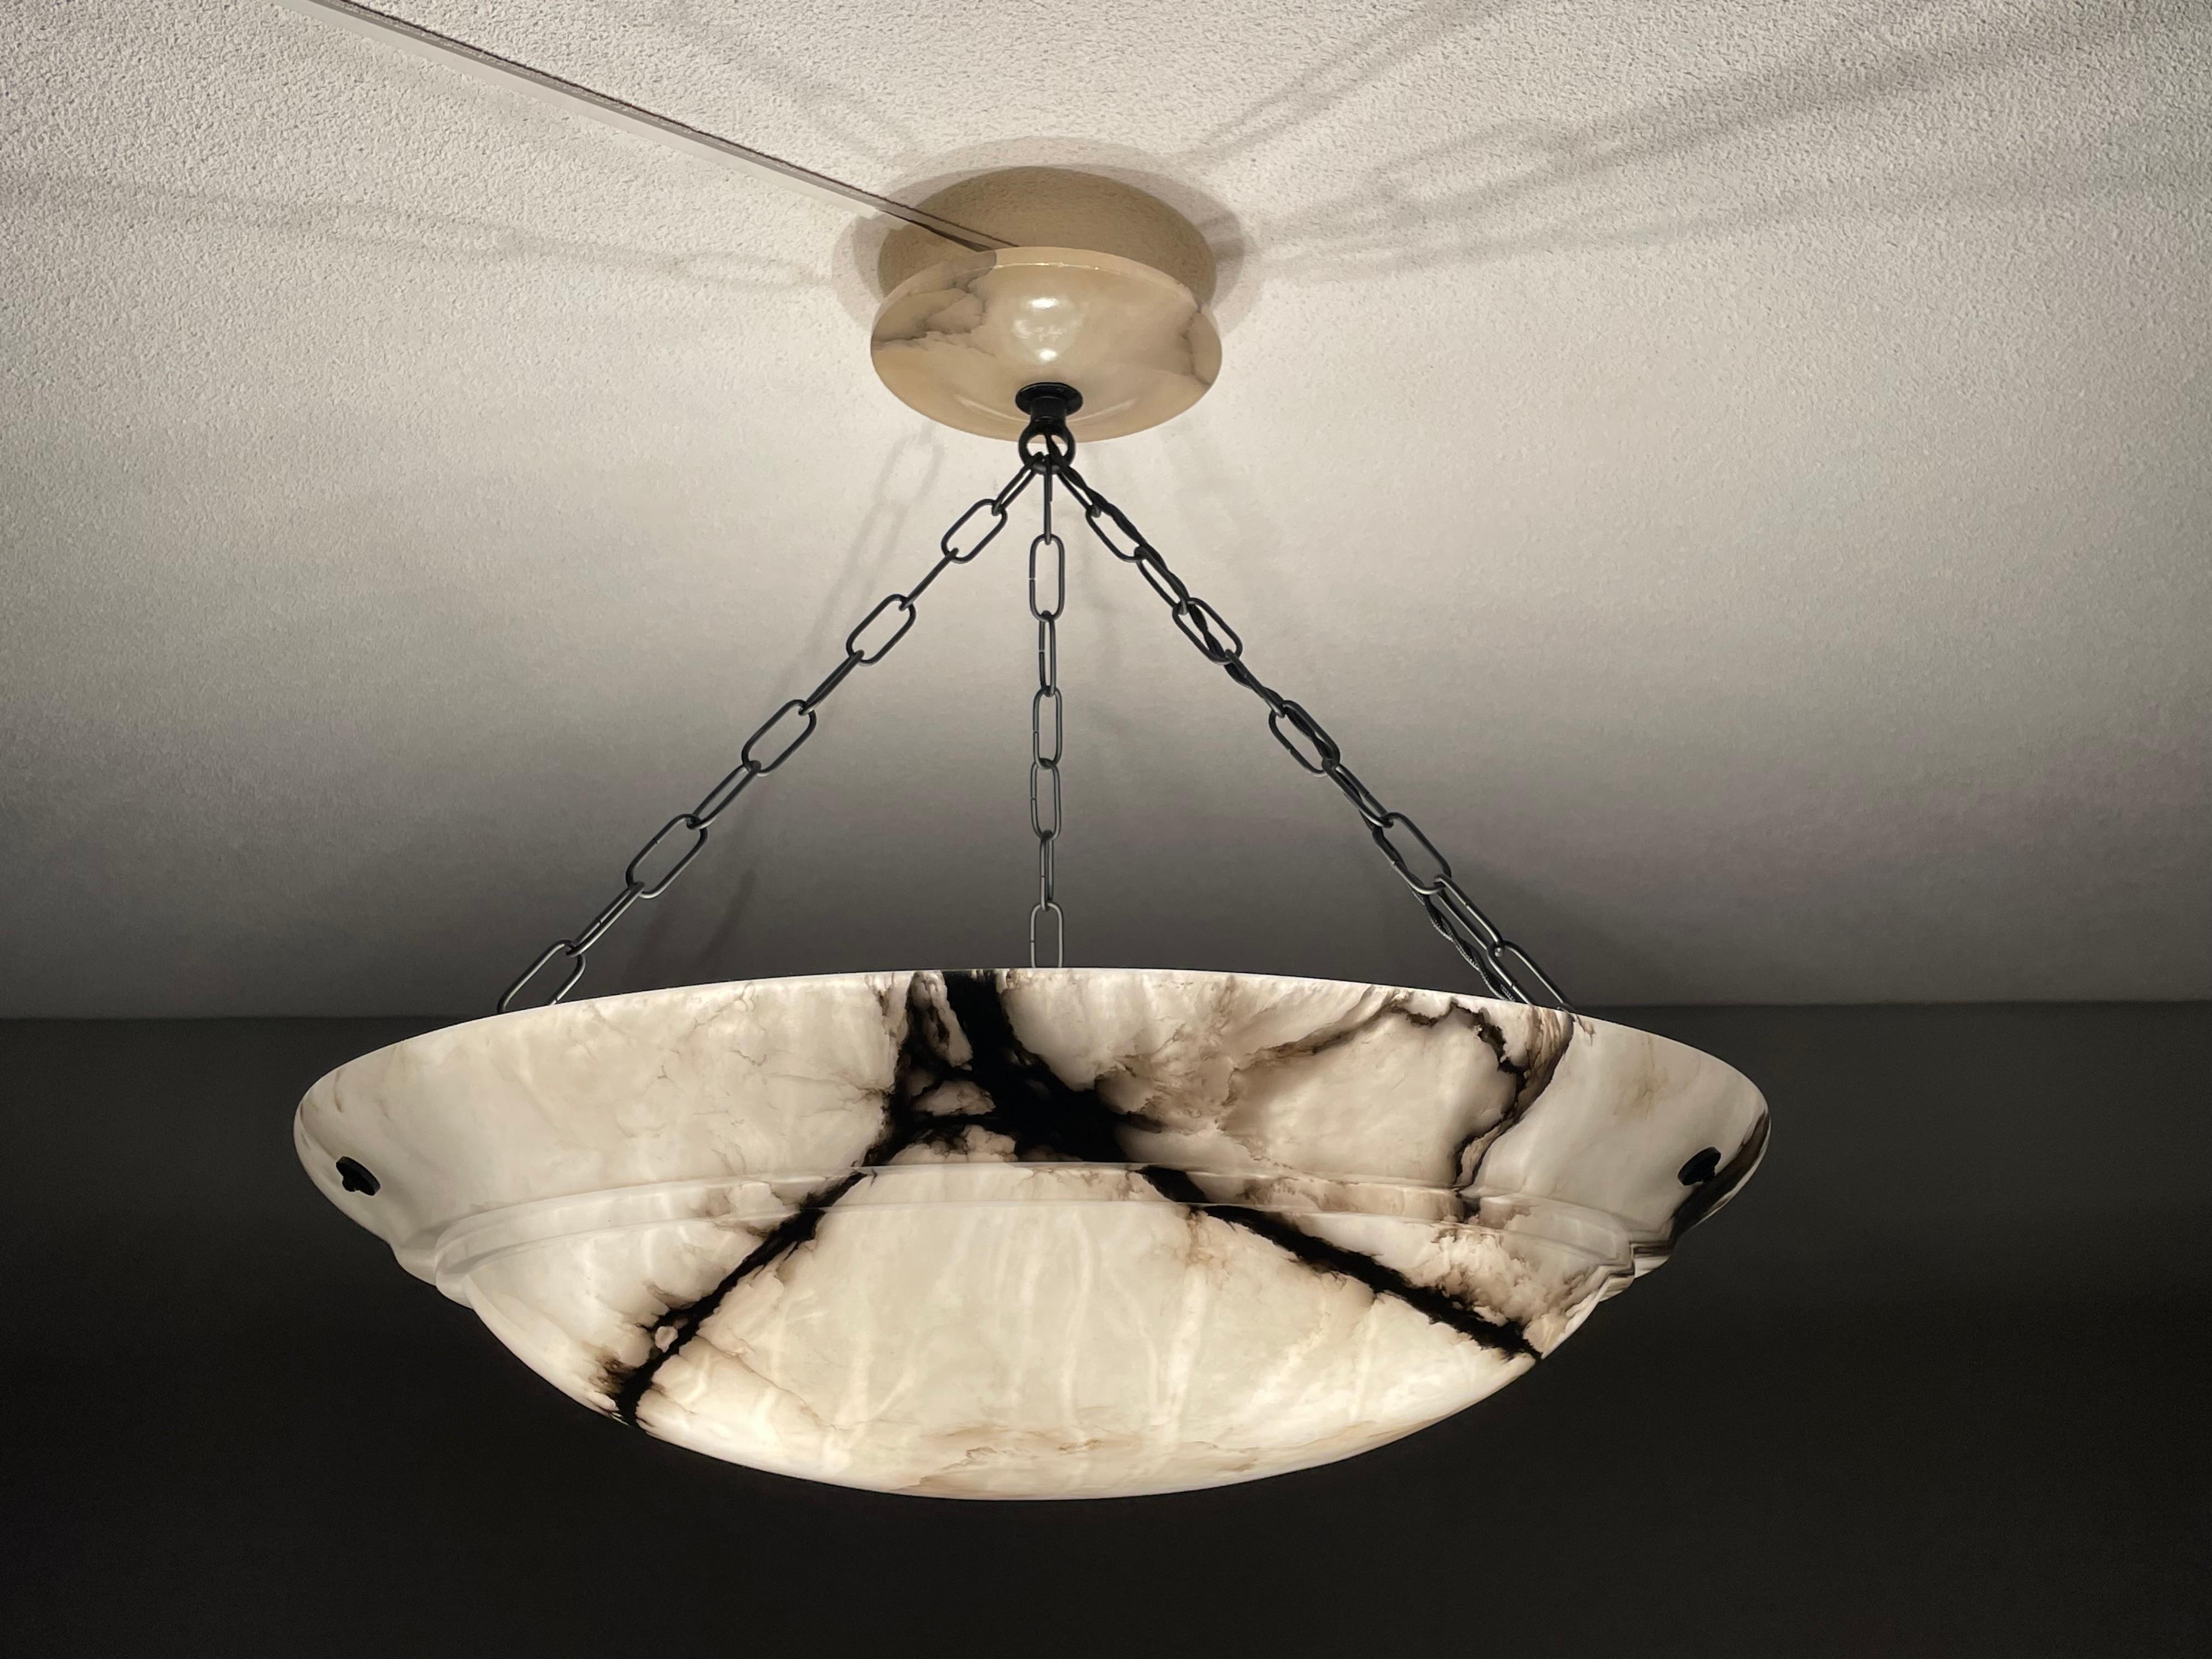 Stunning design and extraordinary size, over 21 inches in diameter antique alabaster light fixture.

Thanks to its extra large size and timeless design this superb condition chandelier from the European Art Deco era is one of the most beautiful